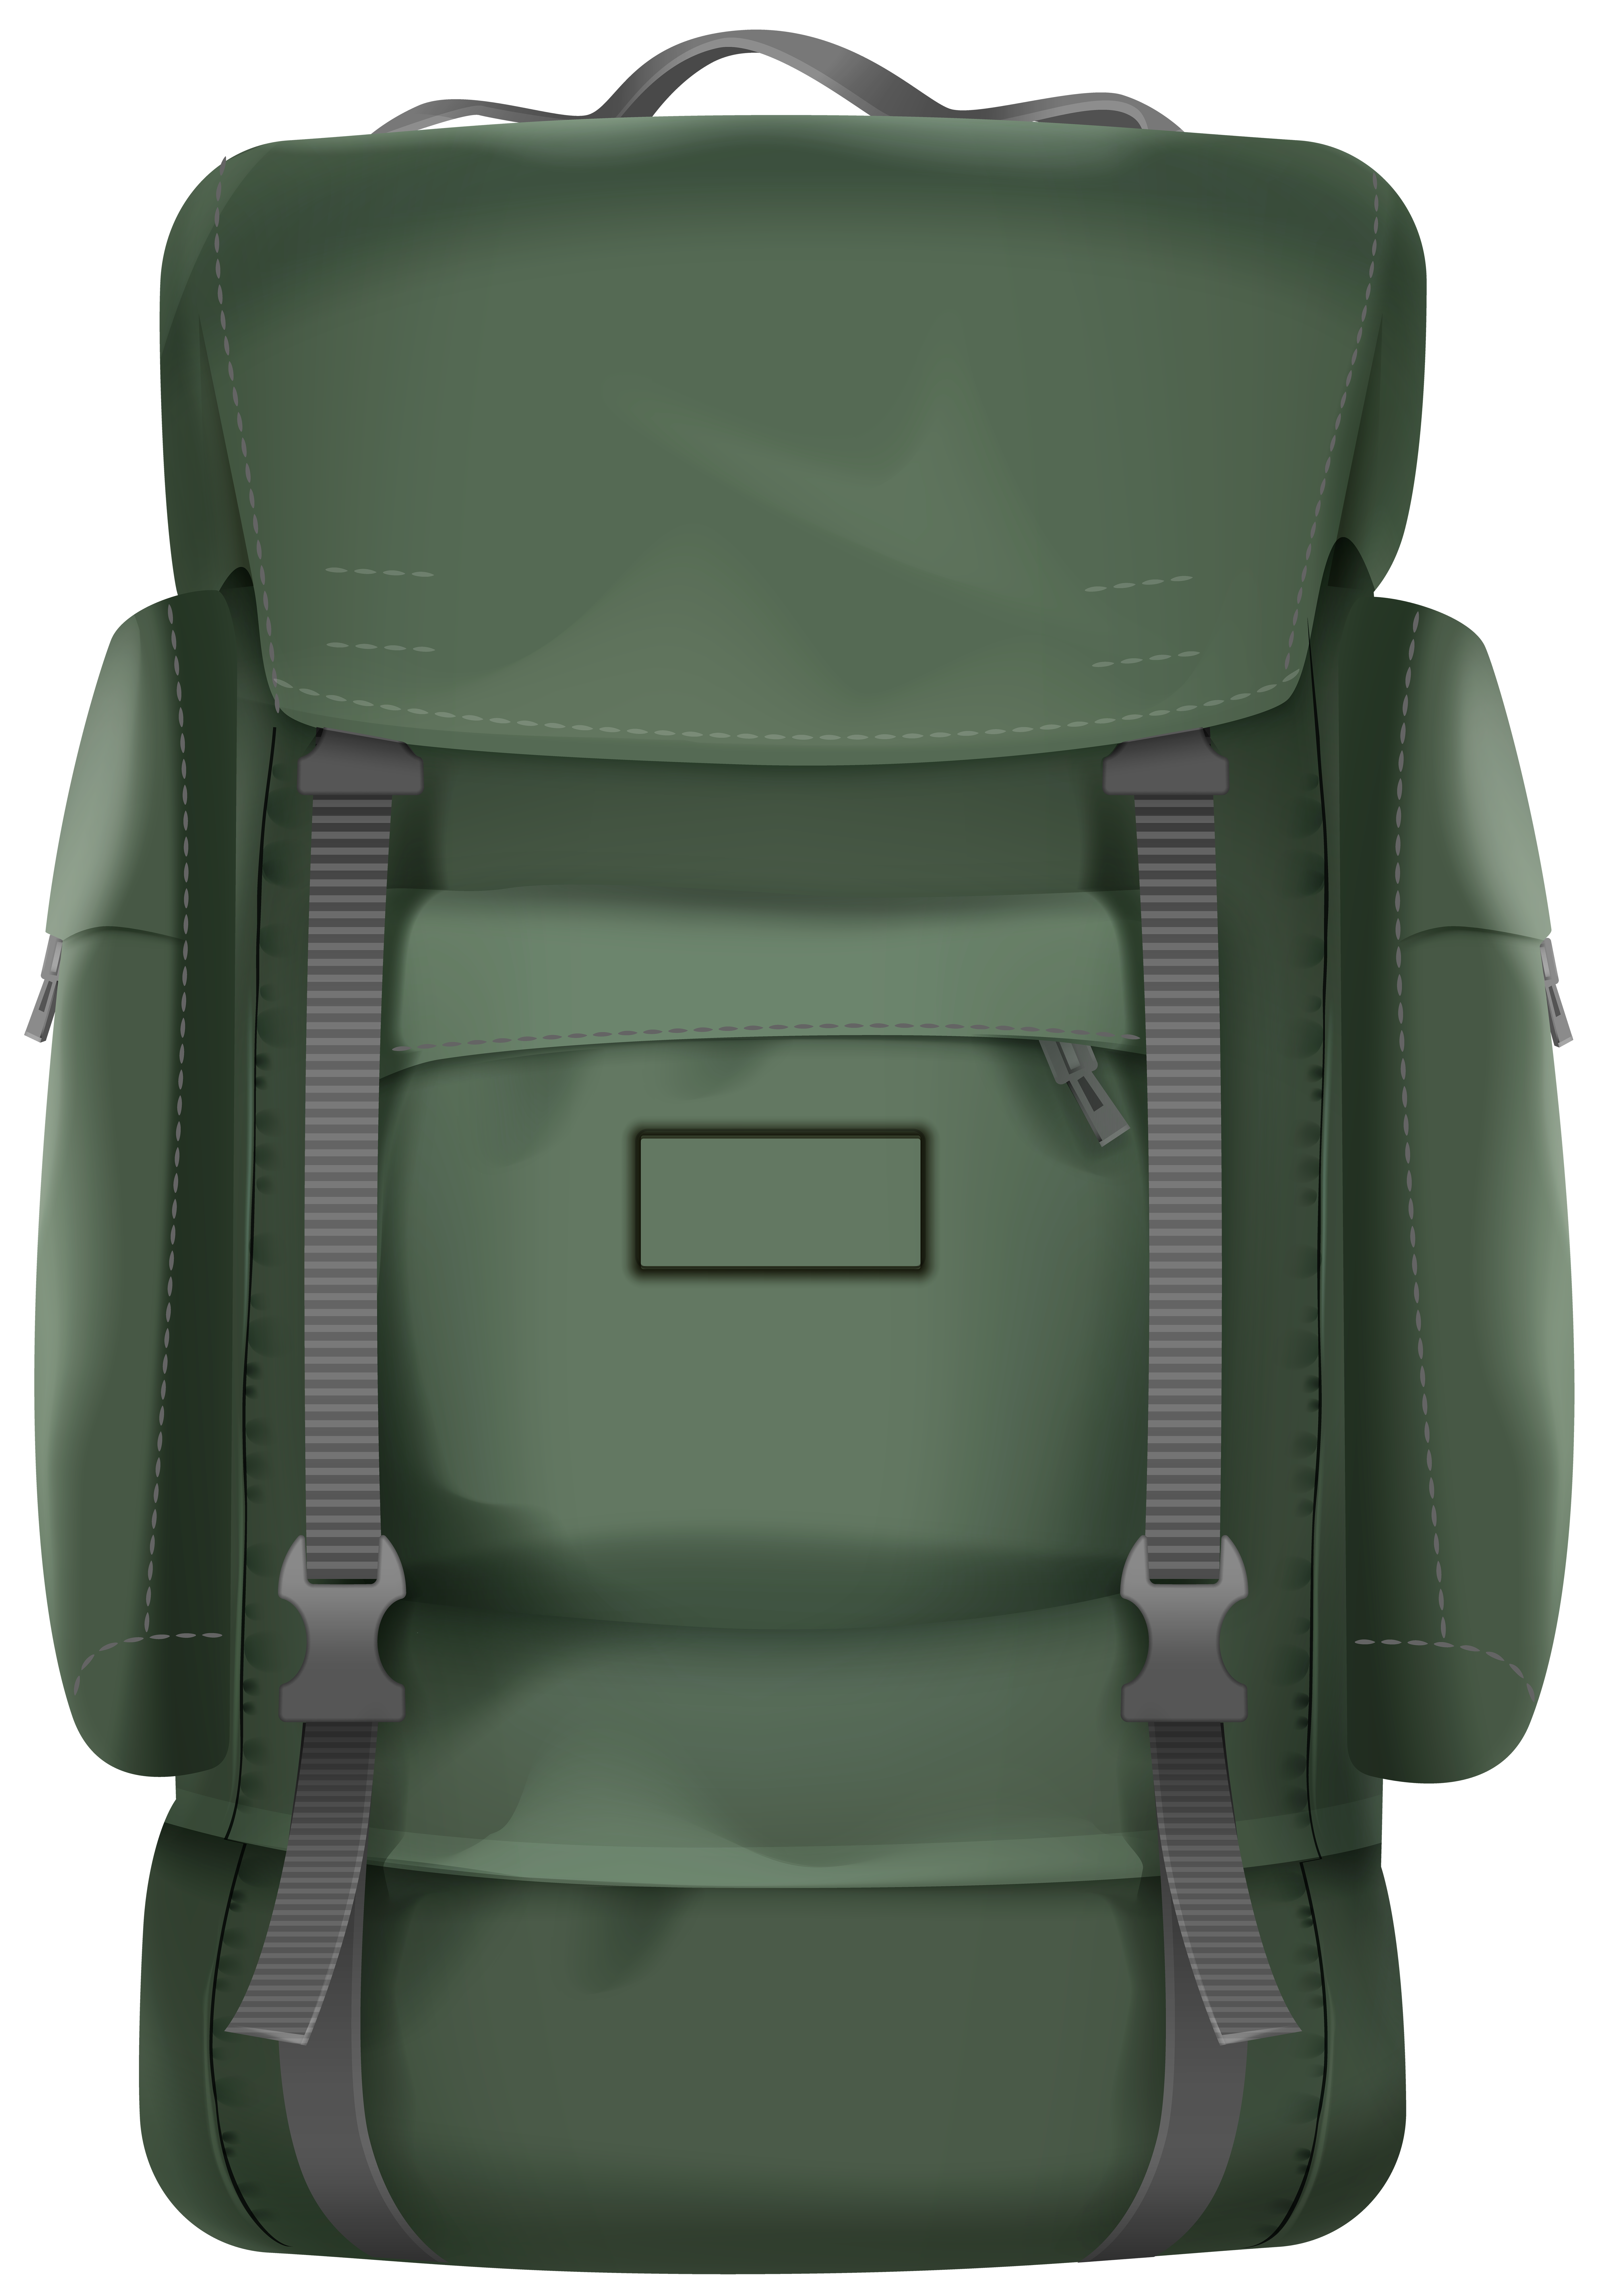 luggage clipart tourism